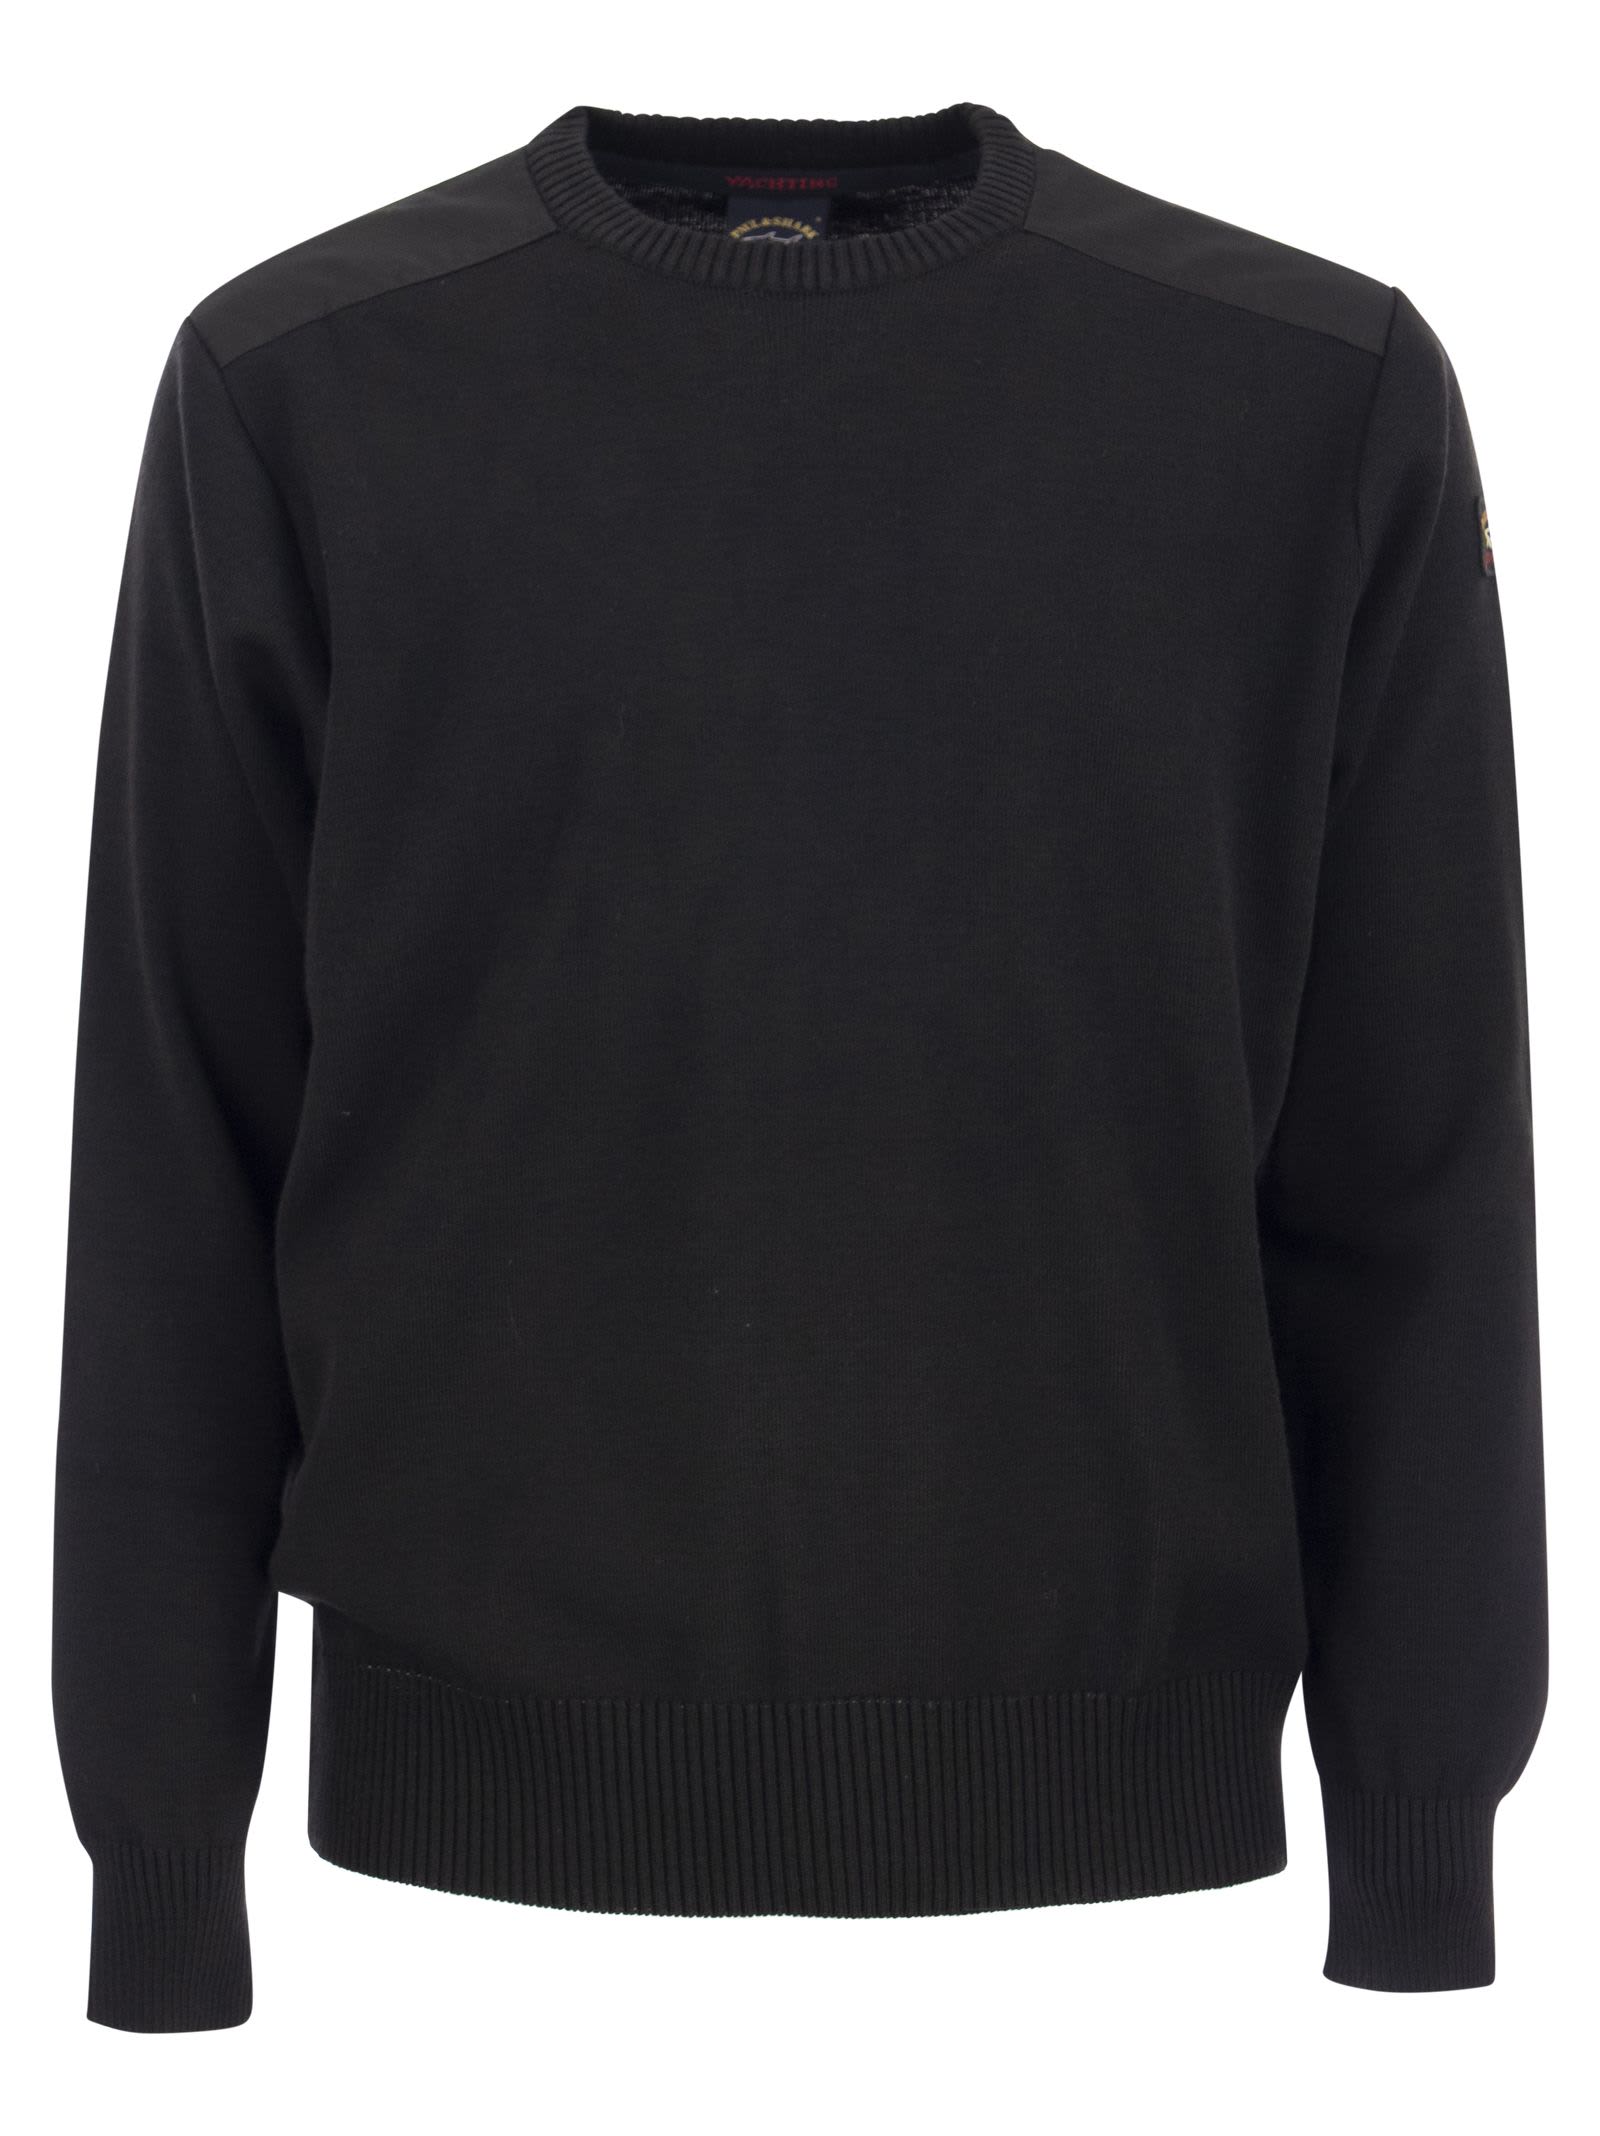 Paul&amp;shark Wool Crew Neck With Iconic Badge In Black